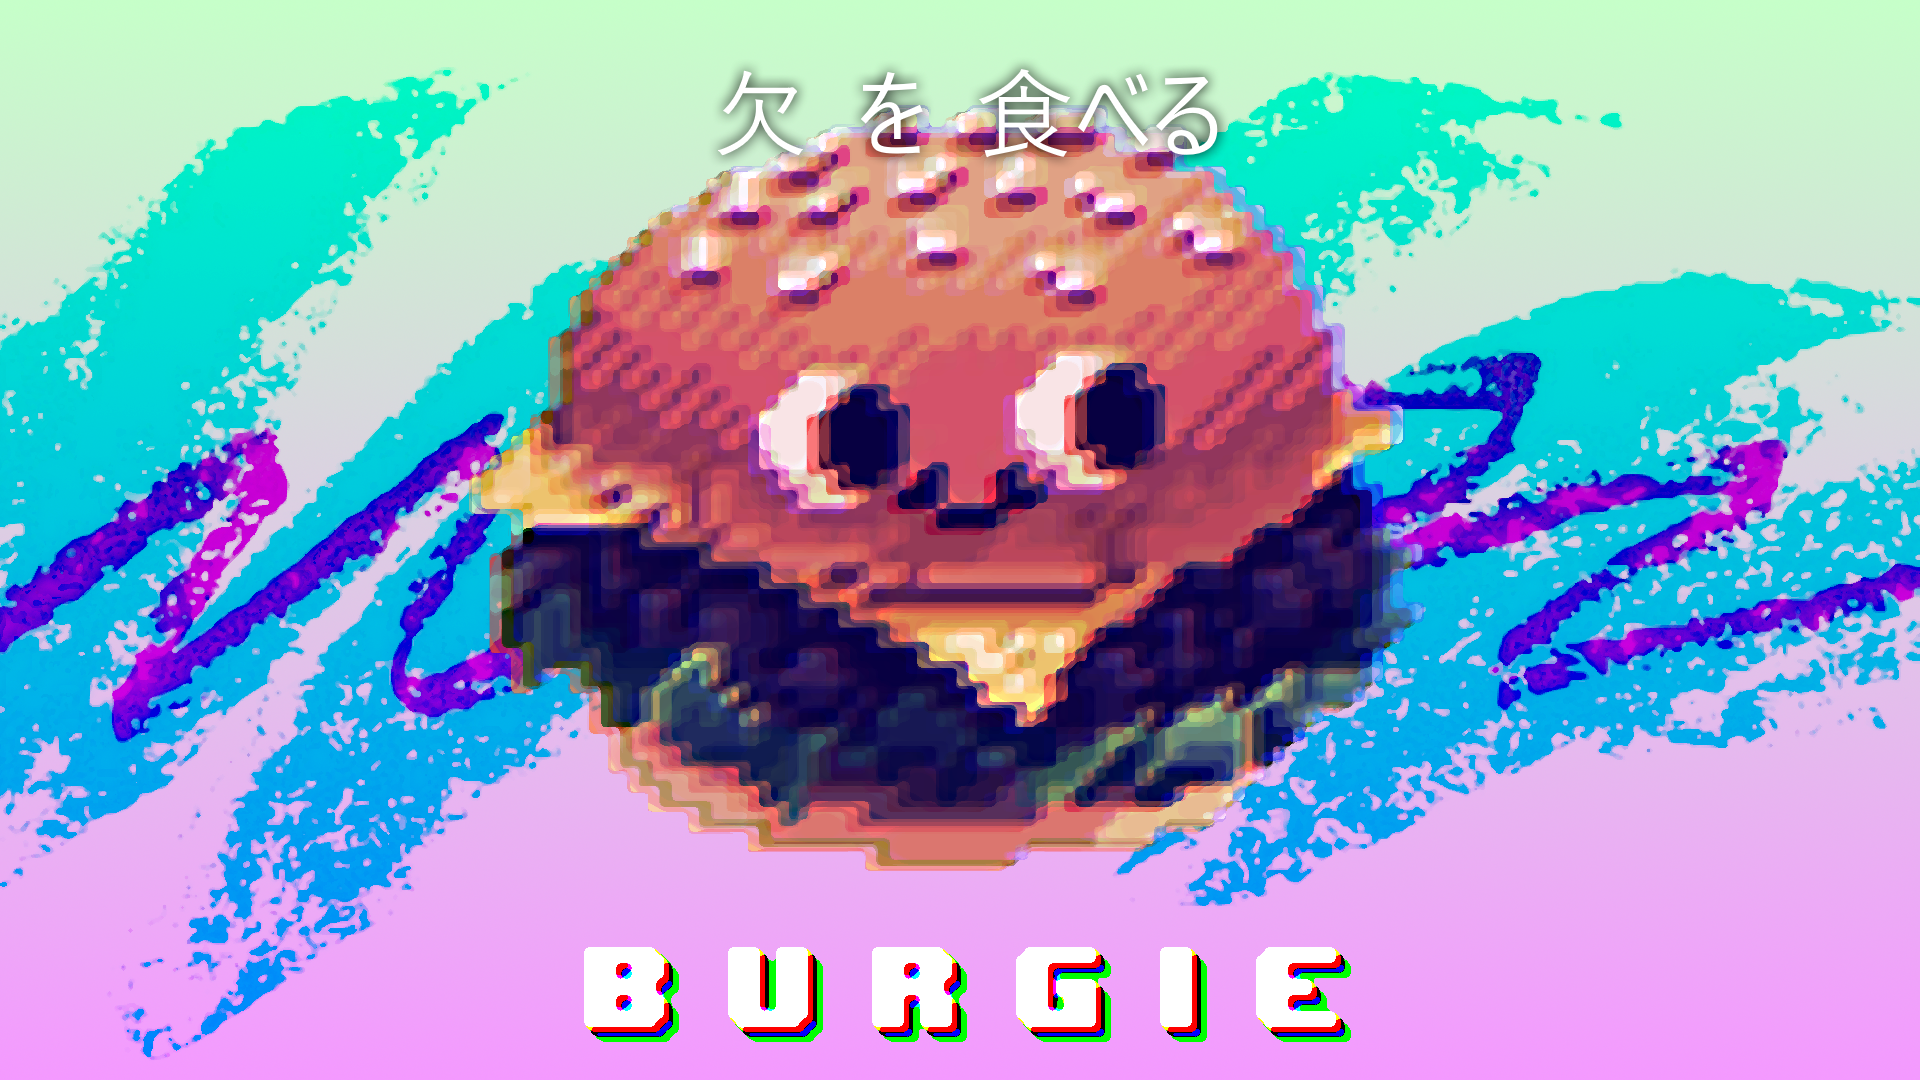 Some Burgie Wallpapers For Those Who Want Them [1366x768] - Jazz Cup Design Transparent , HD Wallpaper & Backgrounds